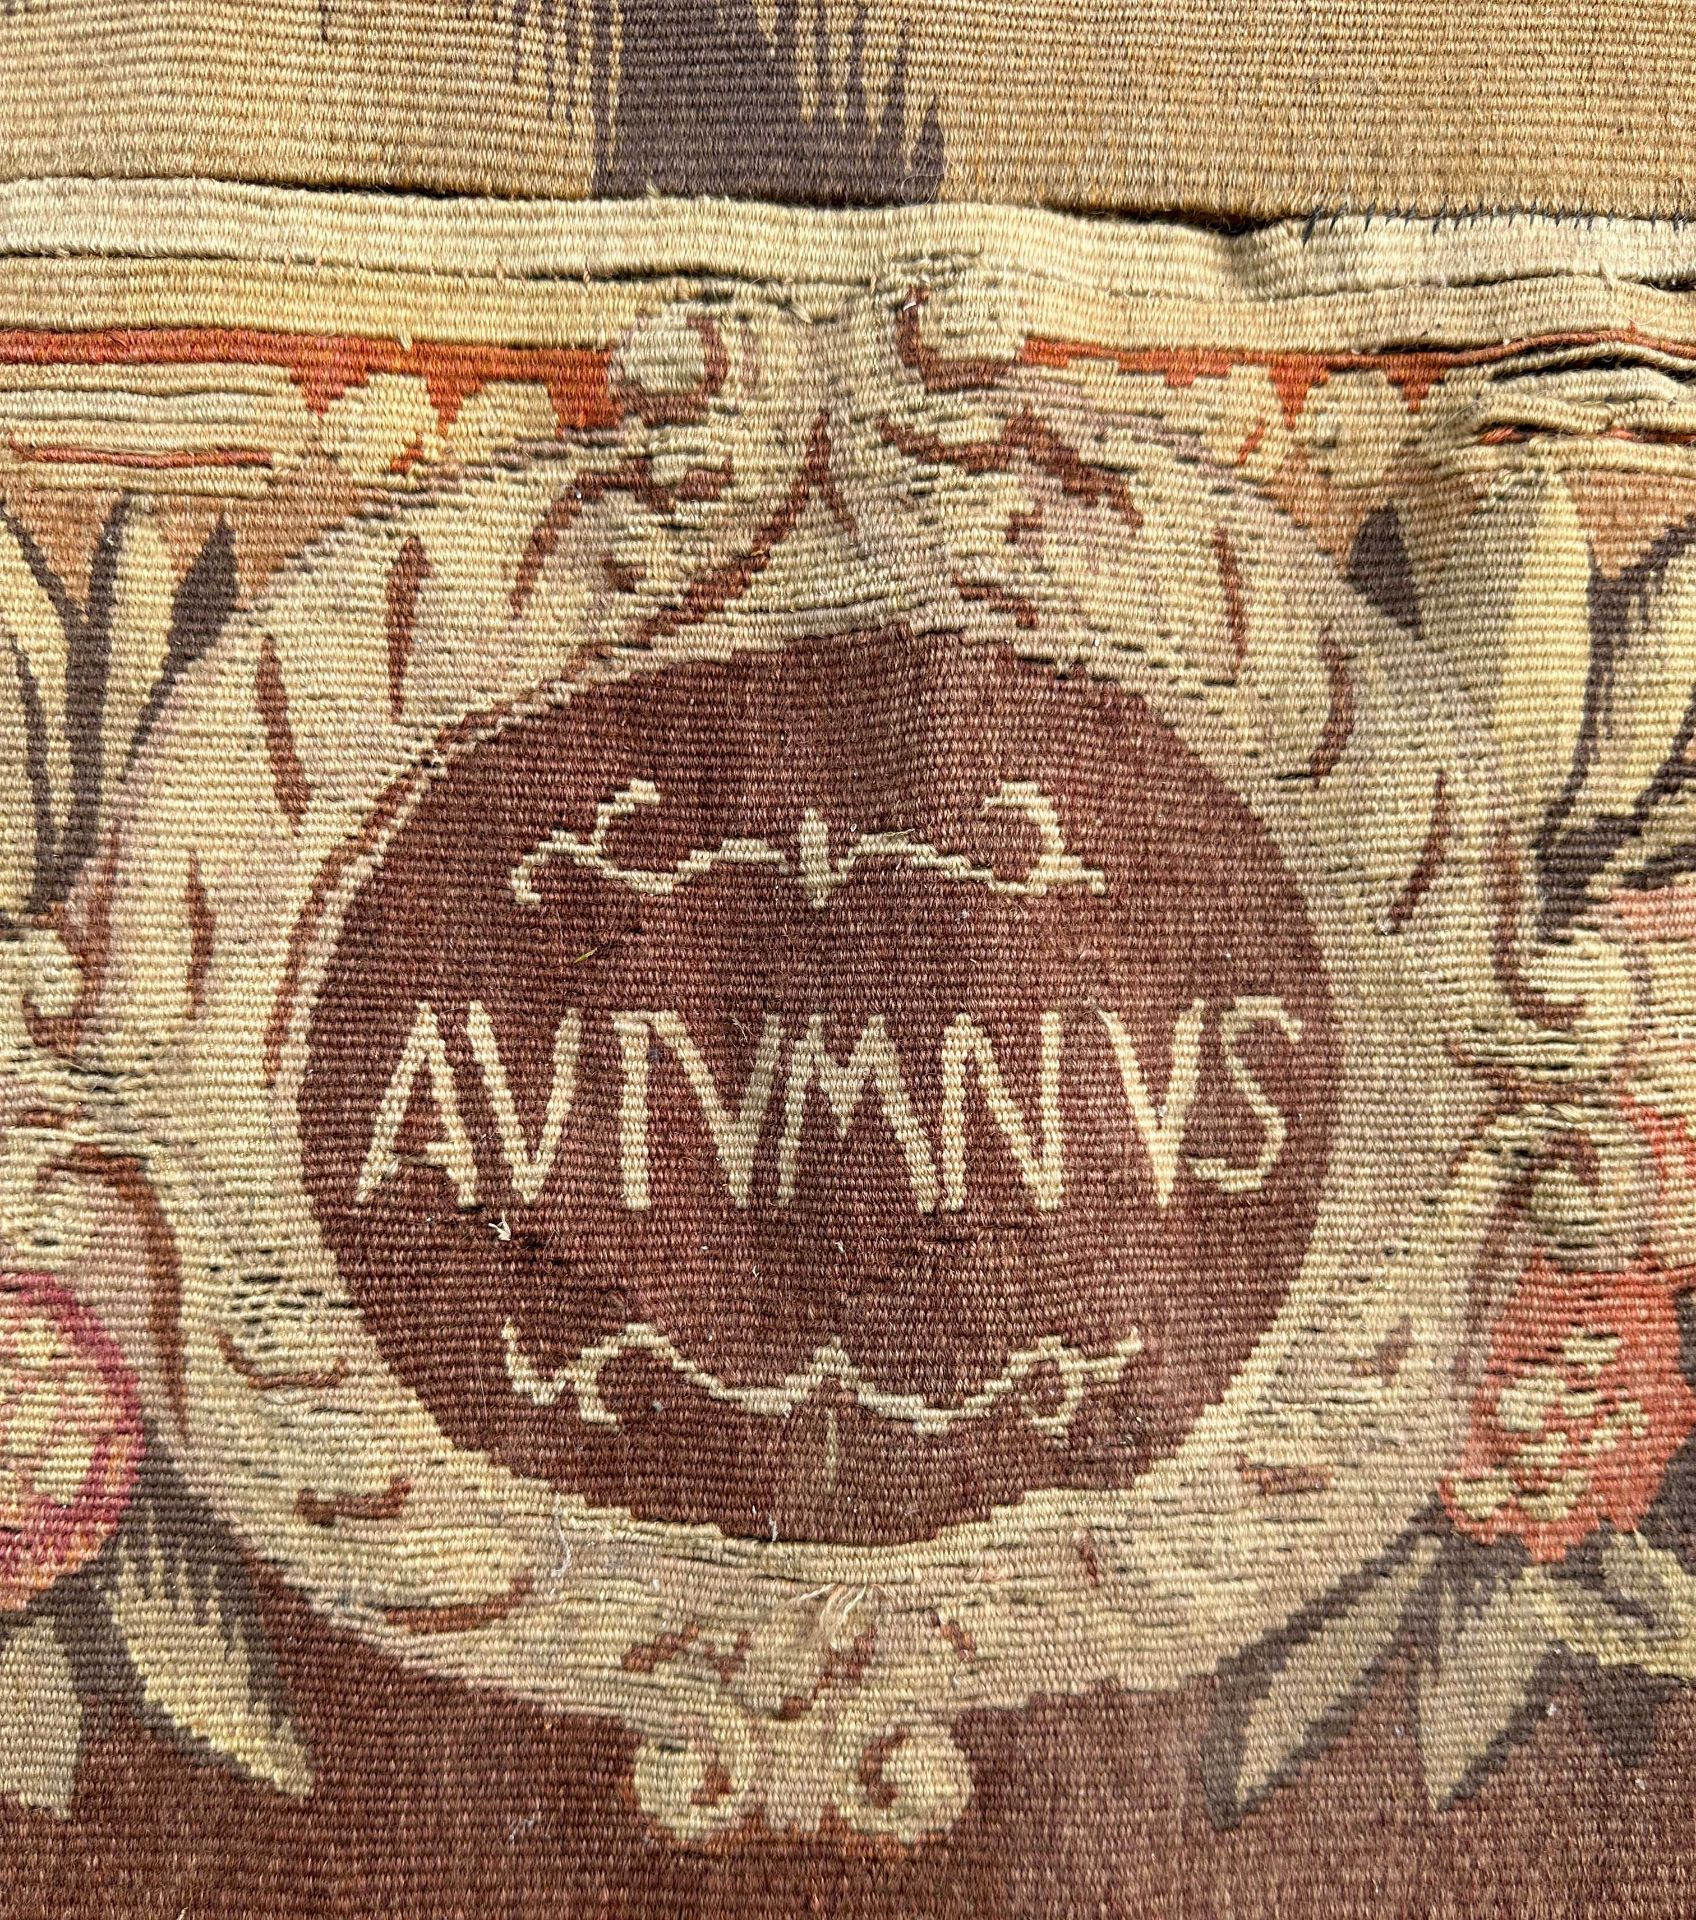 Tapestry. 19th century. Youthful Bacchus. - Image 10 of 12